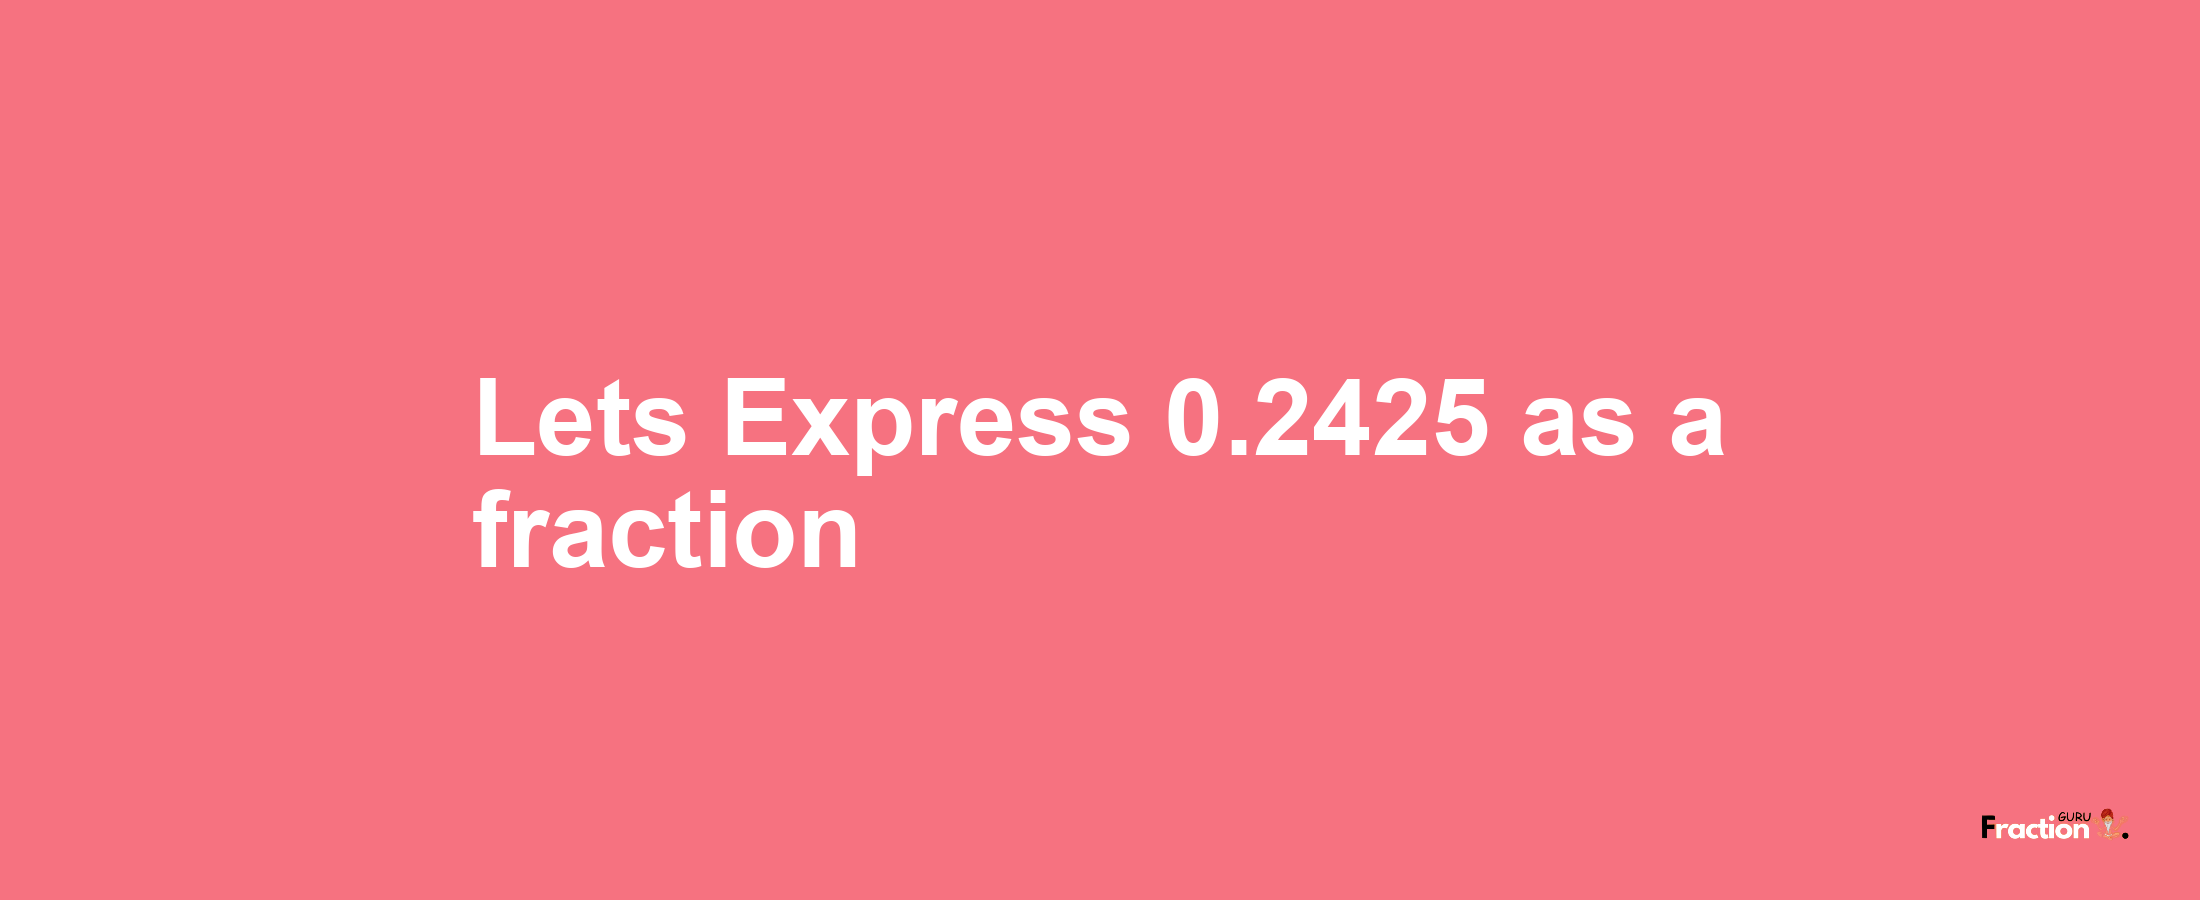 Lets Express 0.2425 as afraction